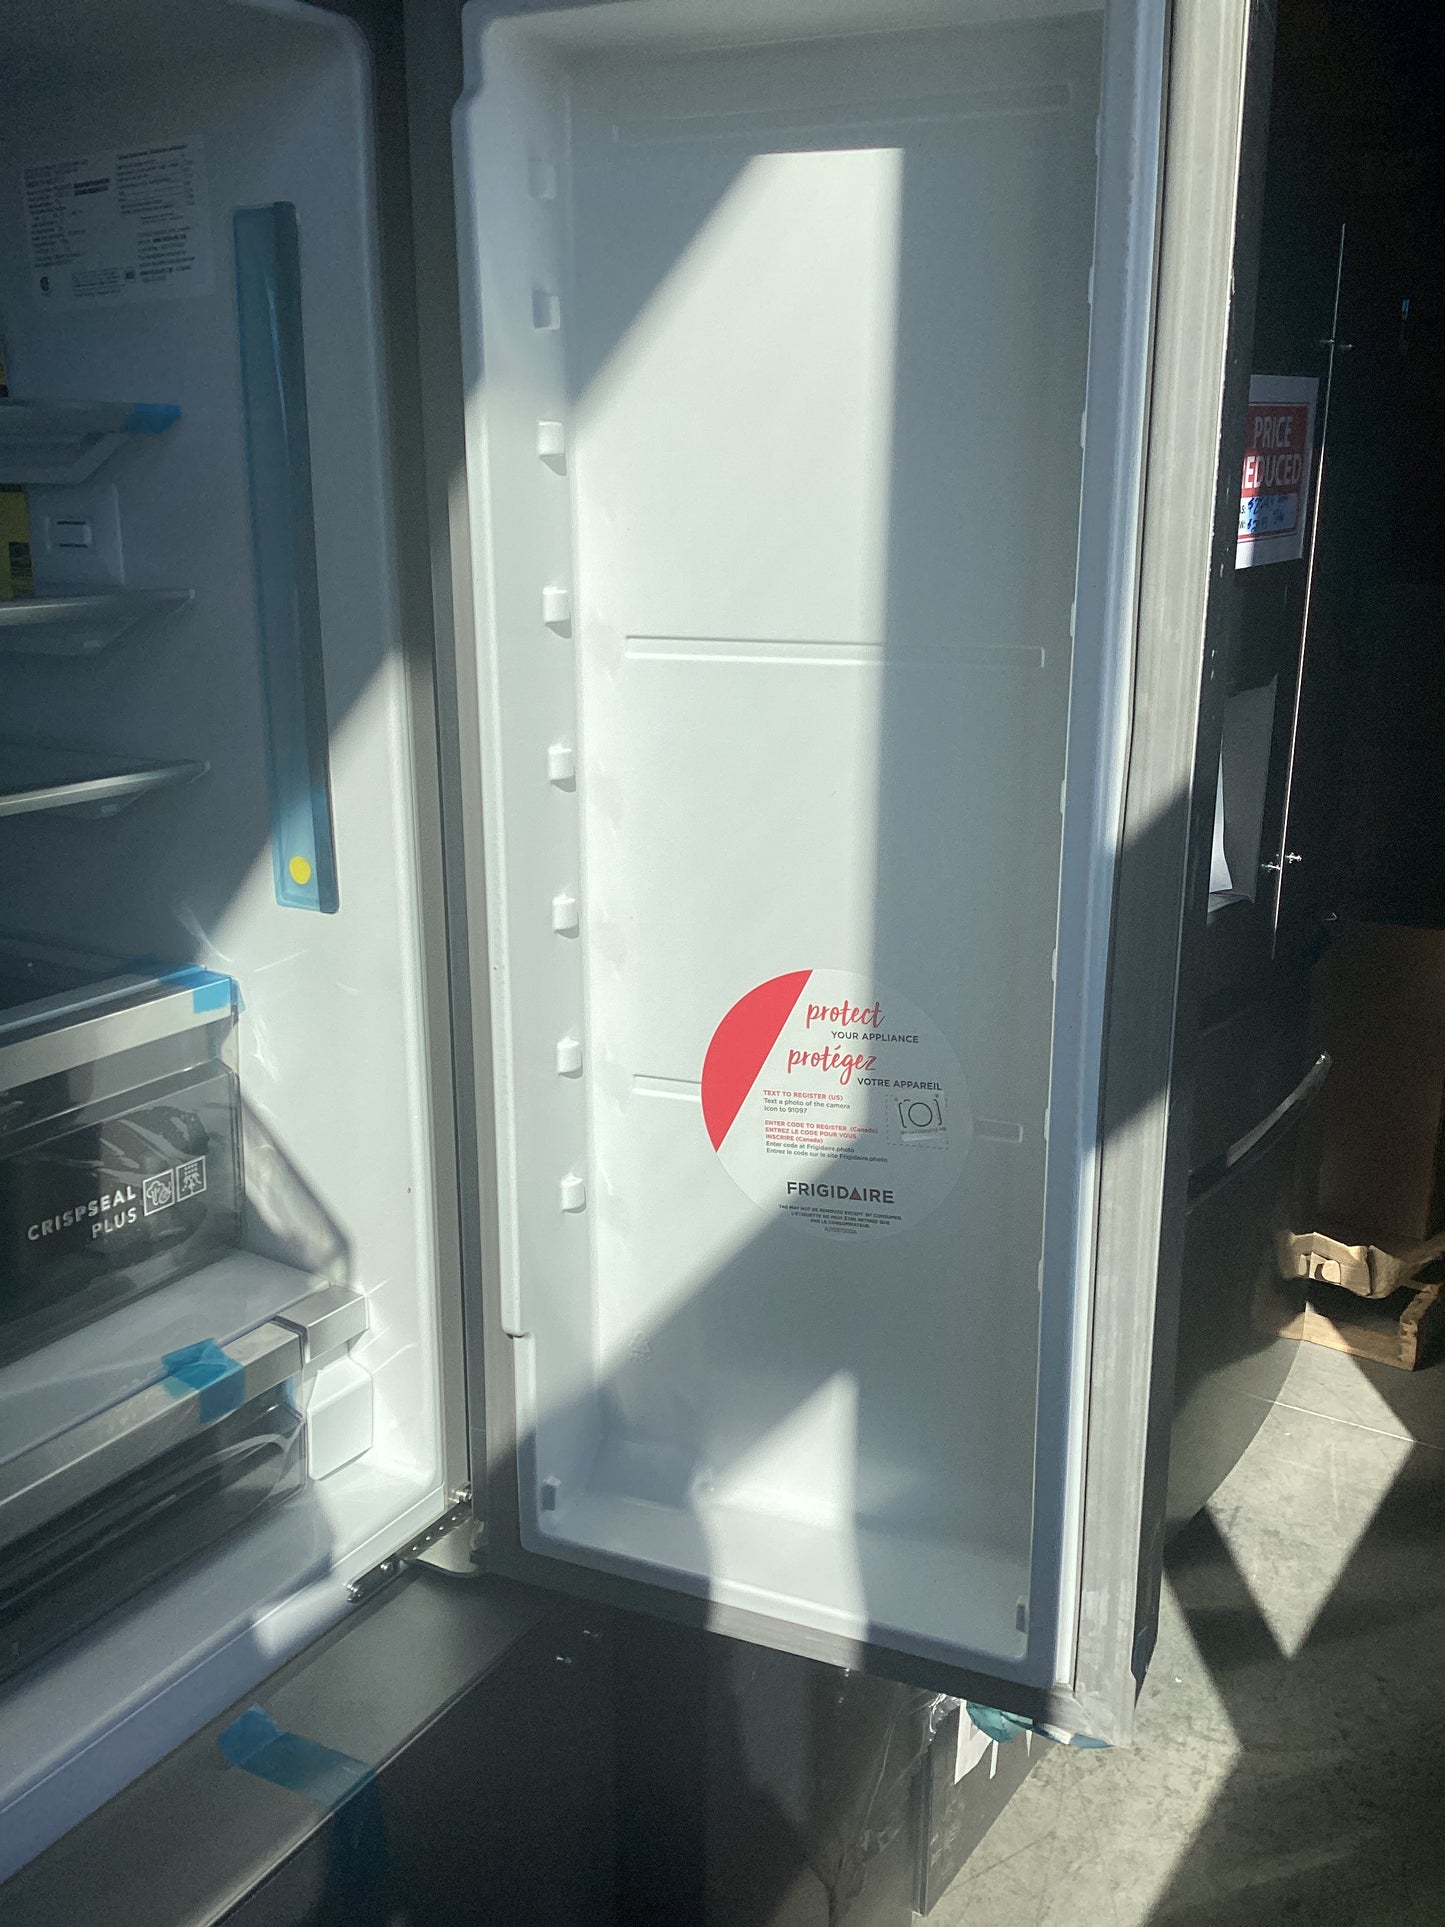 A refrigerator with open doors, showing shelves and compartments inside.